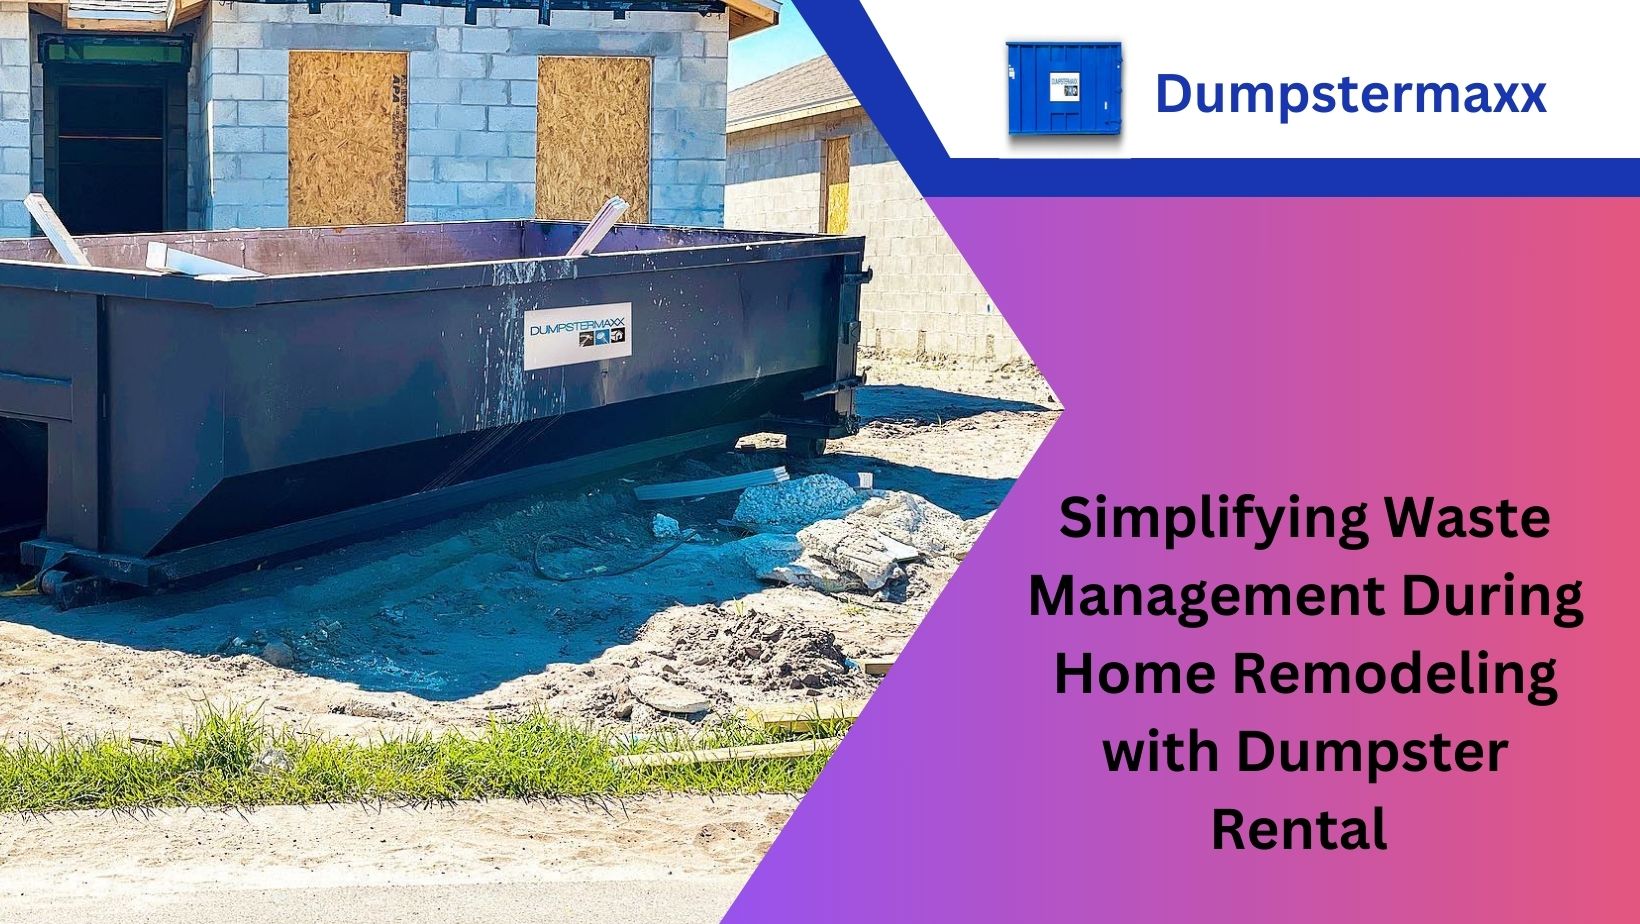 Simplifying Waste Management During Home Remodeling with Dumpster Rental